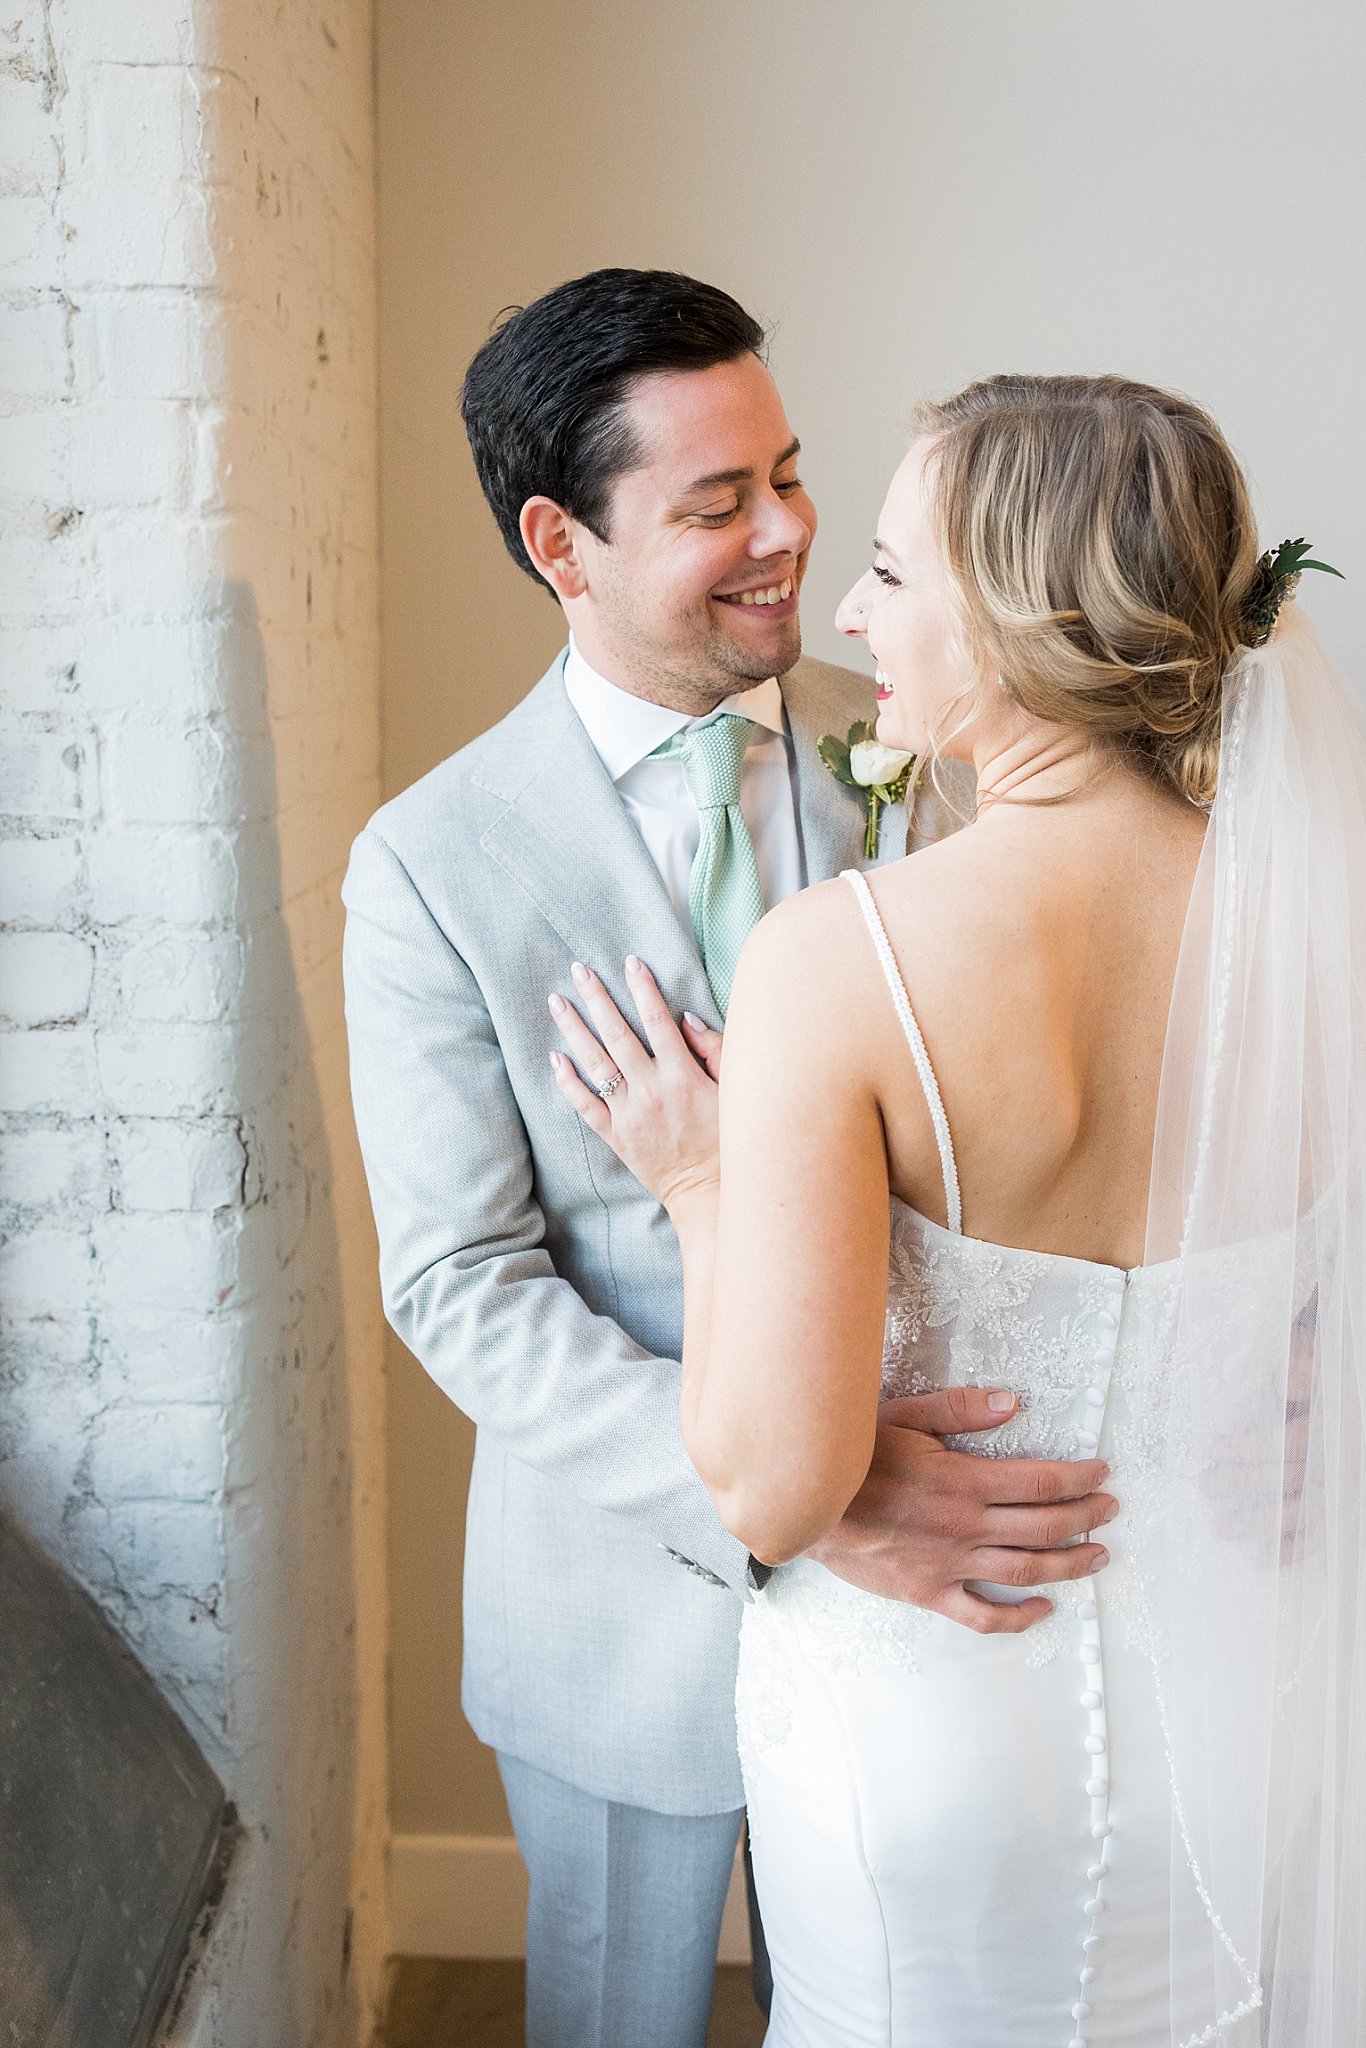 A heartwarming wedding portrait showcasing the couple's pure joy and love, surrounded by the enchanting atmosphere of Judson Mill in downtown Greenville, South Carolina.